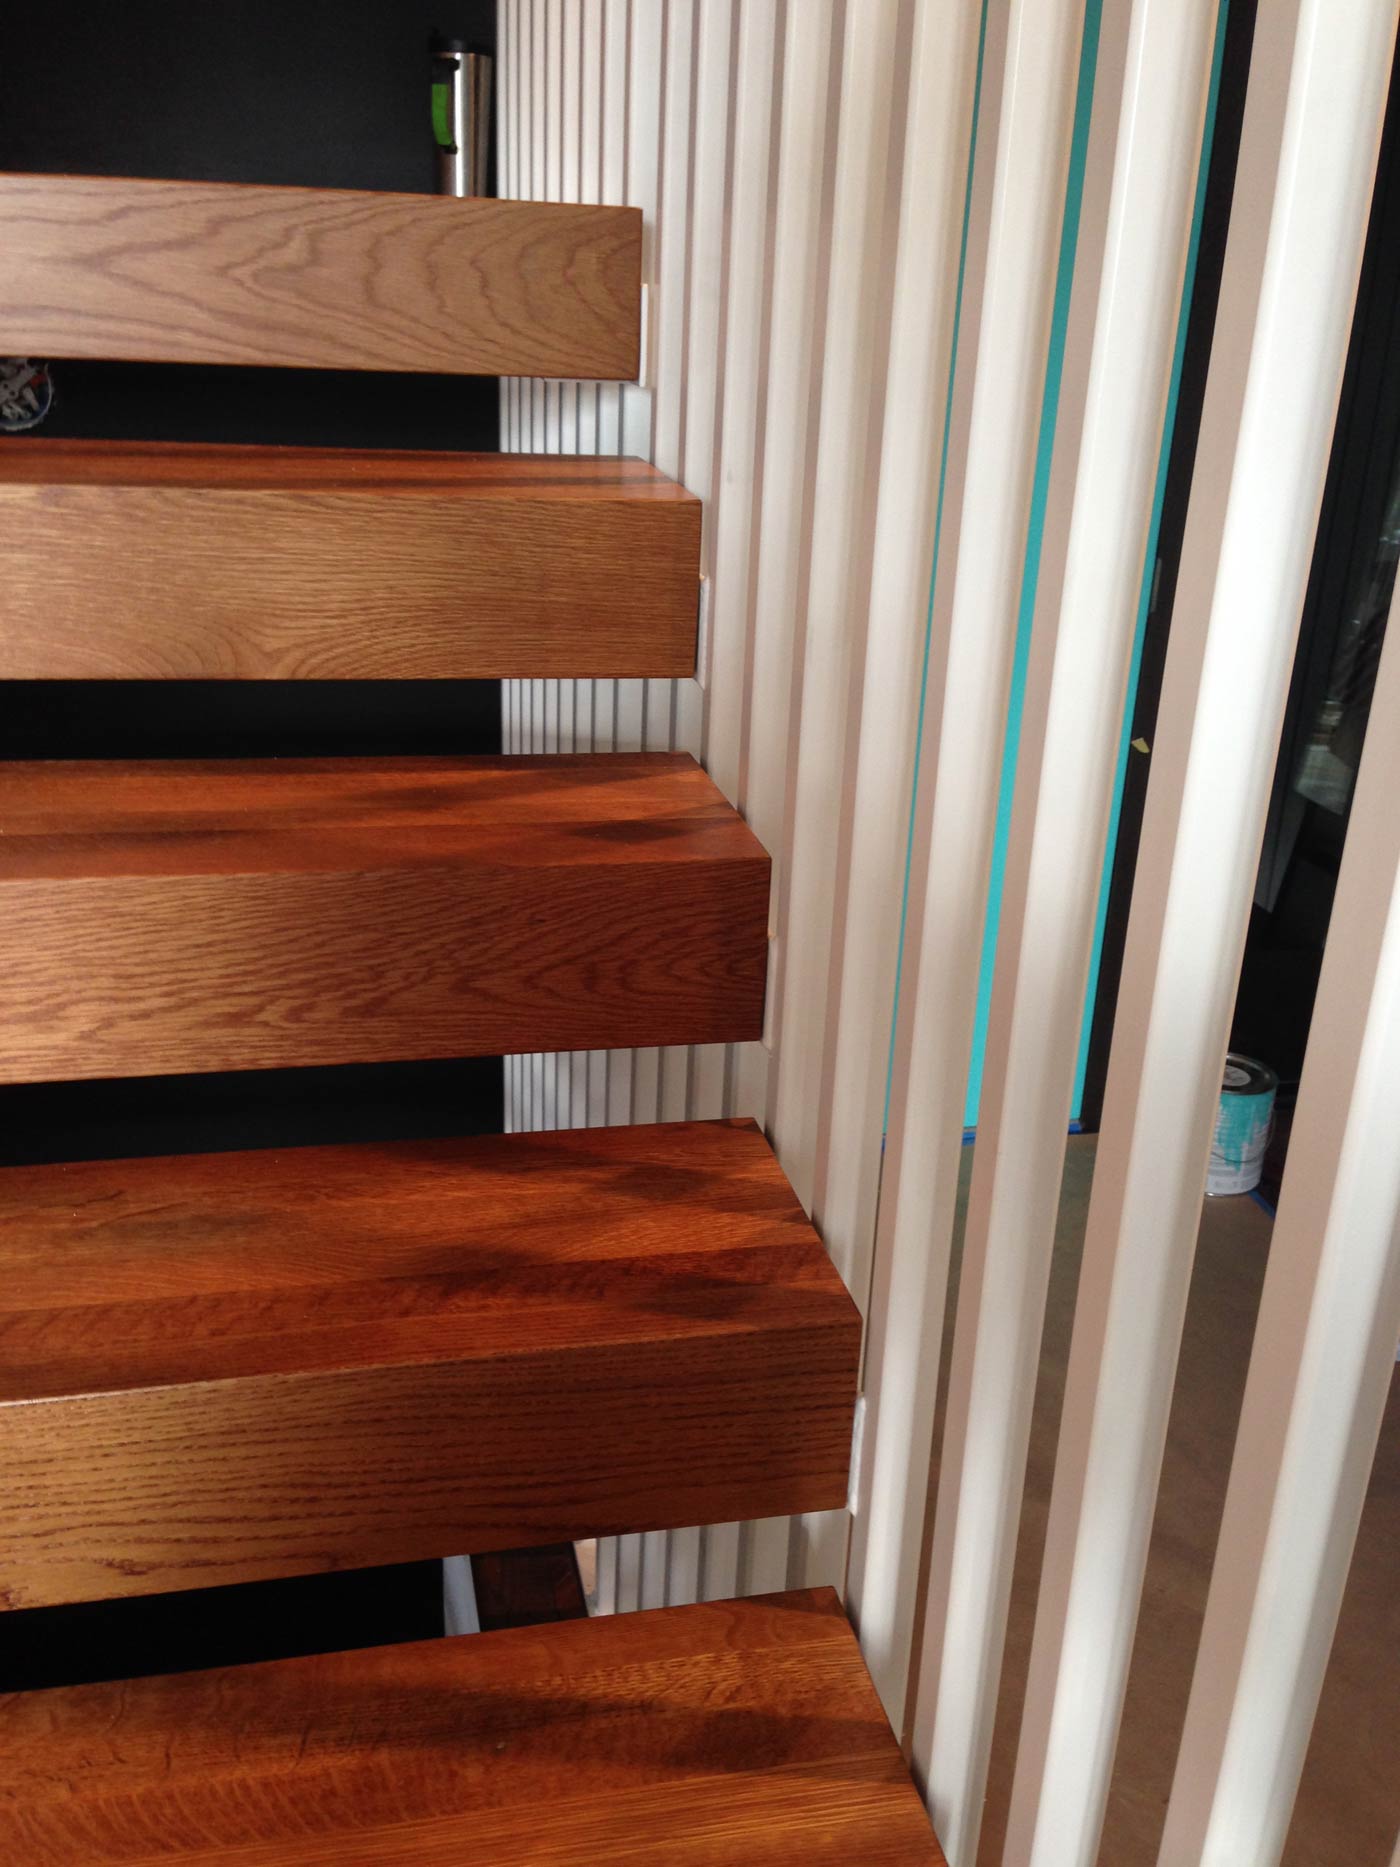 Oak stair trends tie in with one-inch square tube steel verticals in new staircase design.